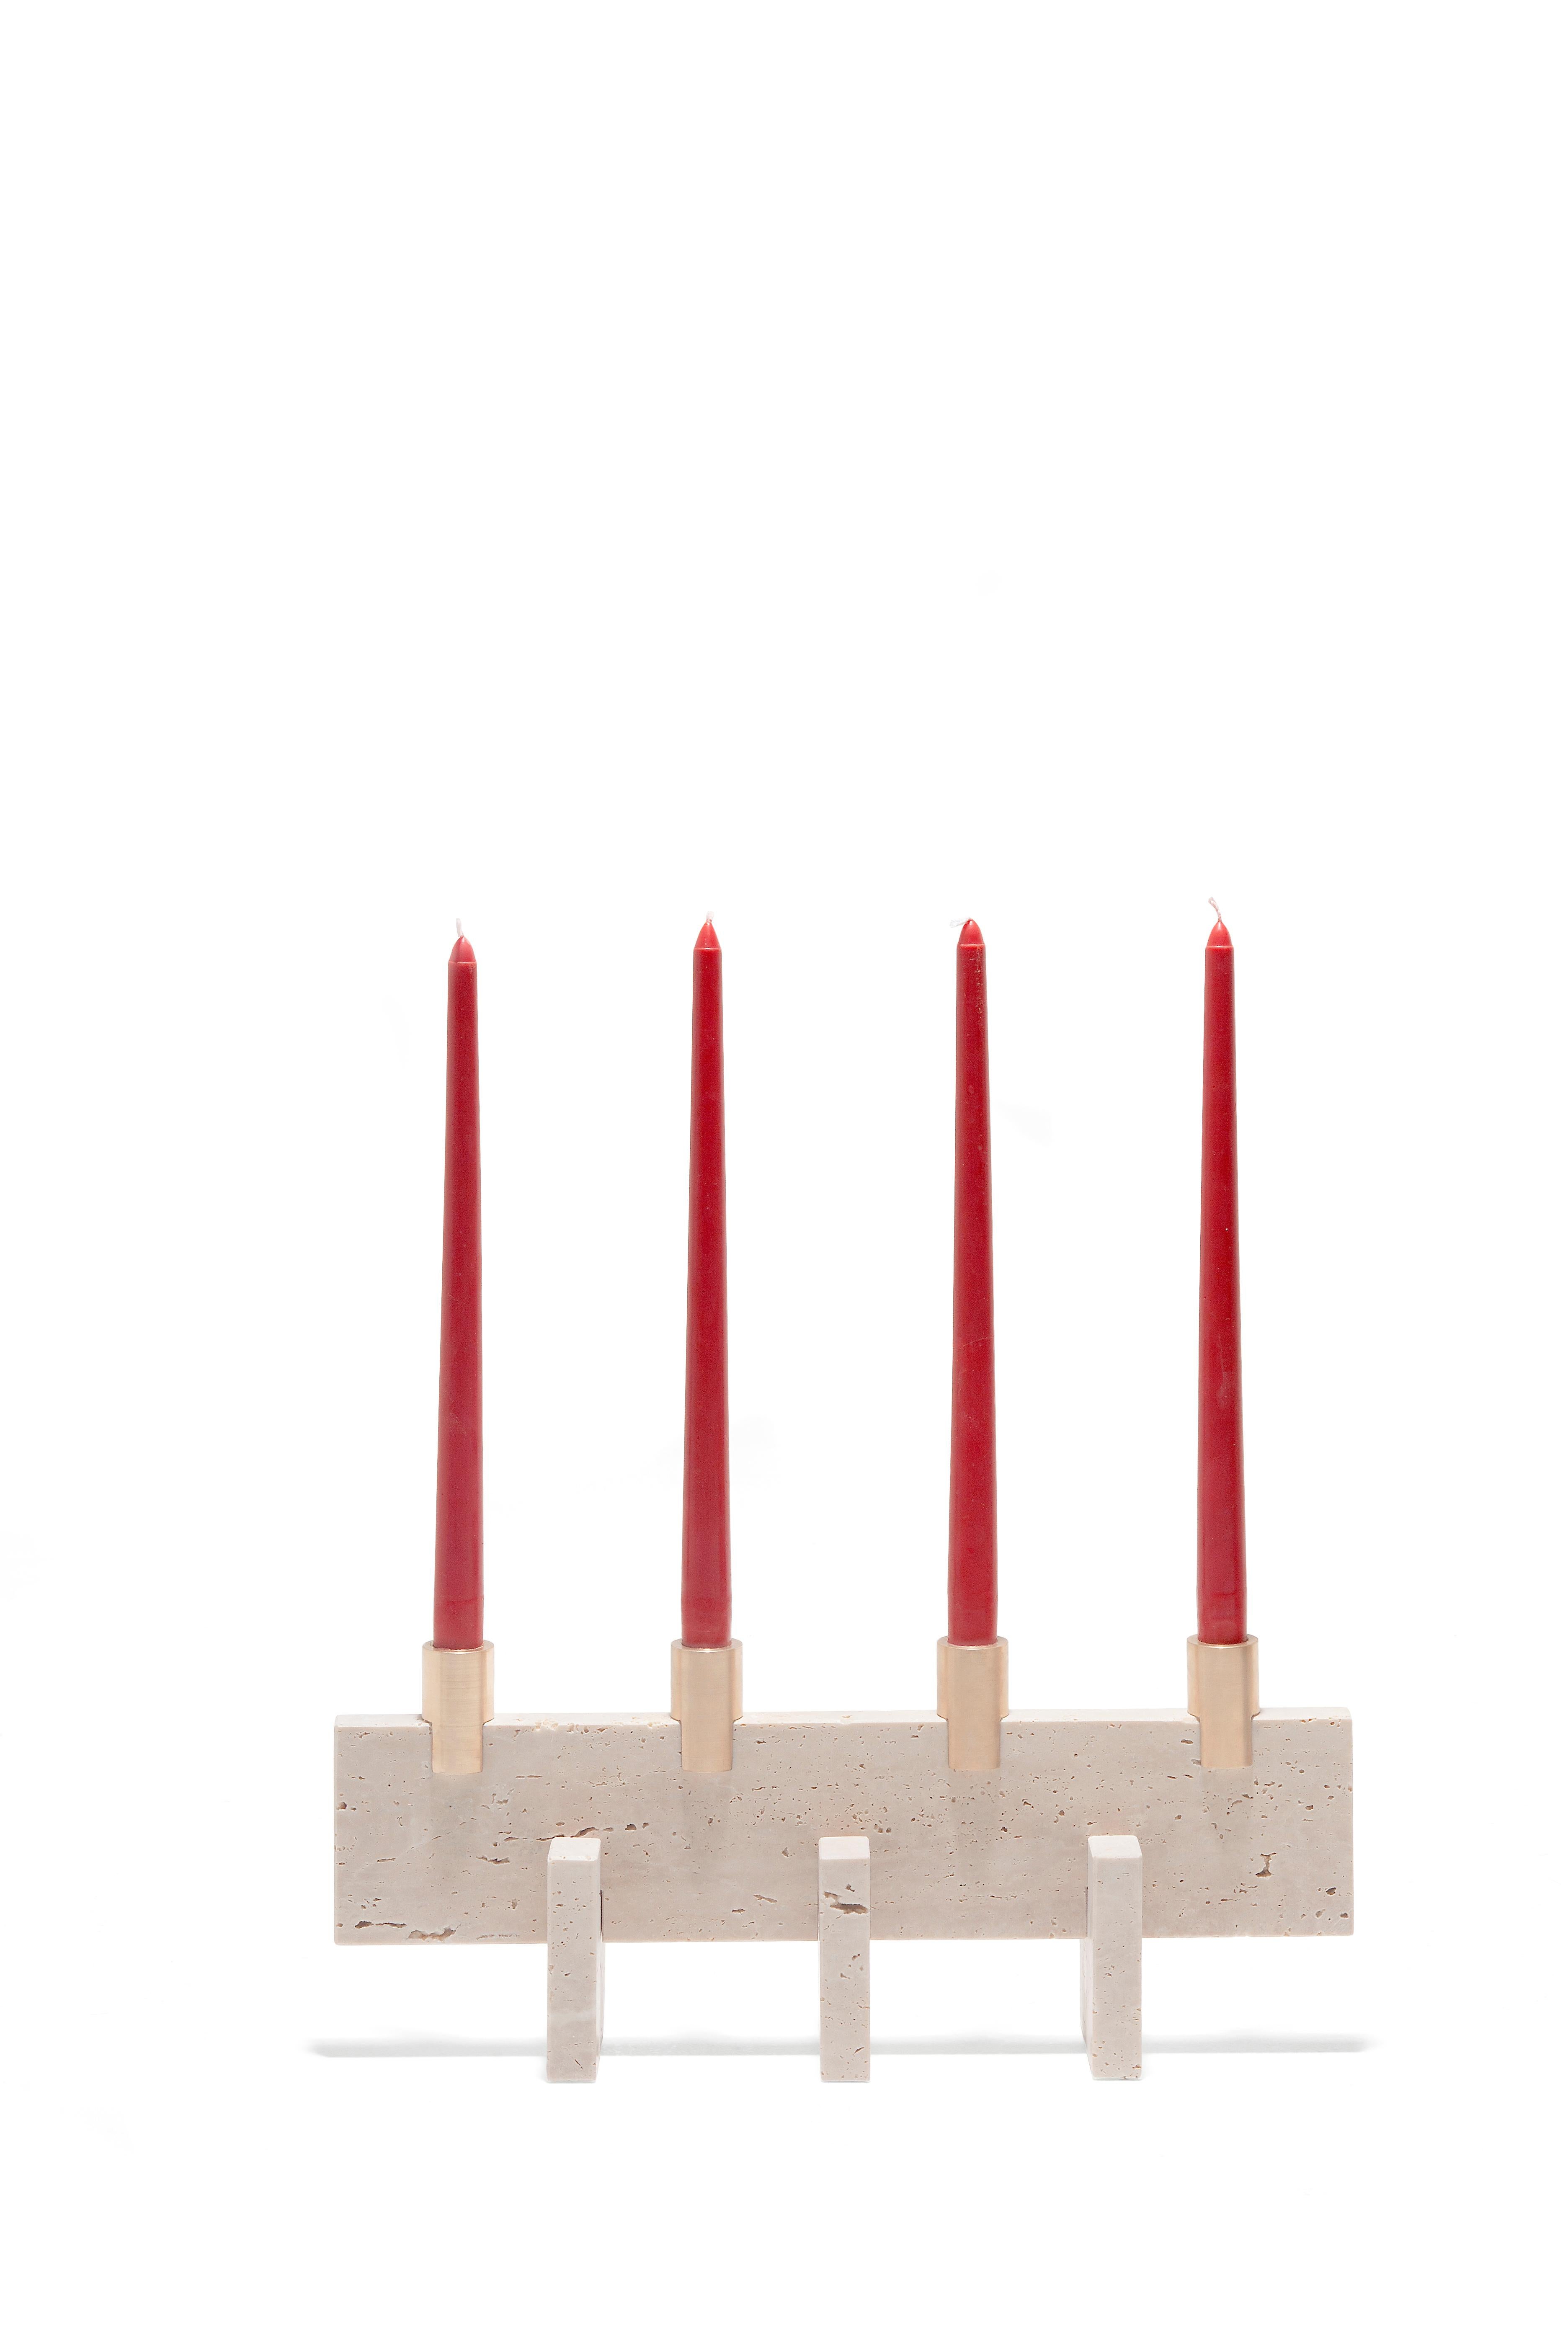 Fit candle 4 by Joseph Vila Capdevila
Material: Travertino marble, brass
Dimensions: 17 x 42 x 9 cm
Weight: 3.7 kg 


Aparentment is a space for creation and innovation, experimenting with materials with the goal to develop robust, lasting and